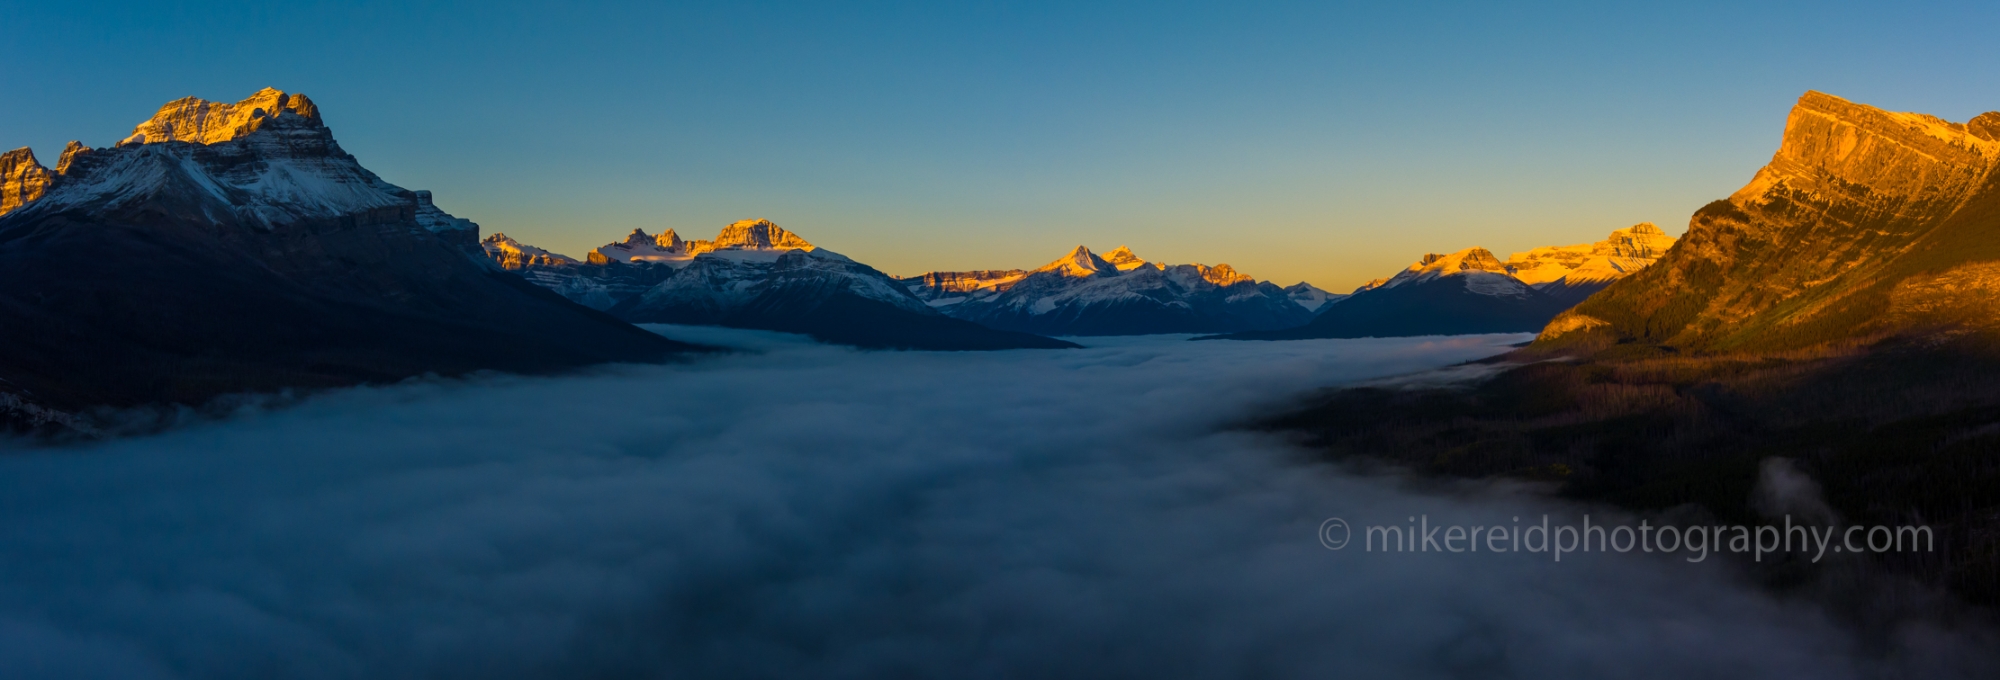 Over the Canadian Rockies Peaks Above the Clouds Sunrise Pano